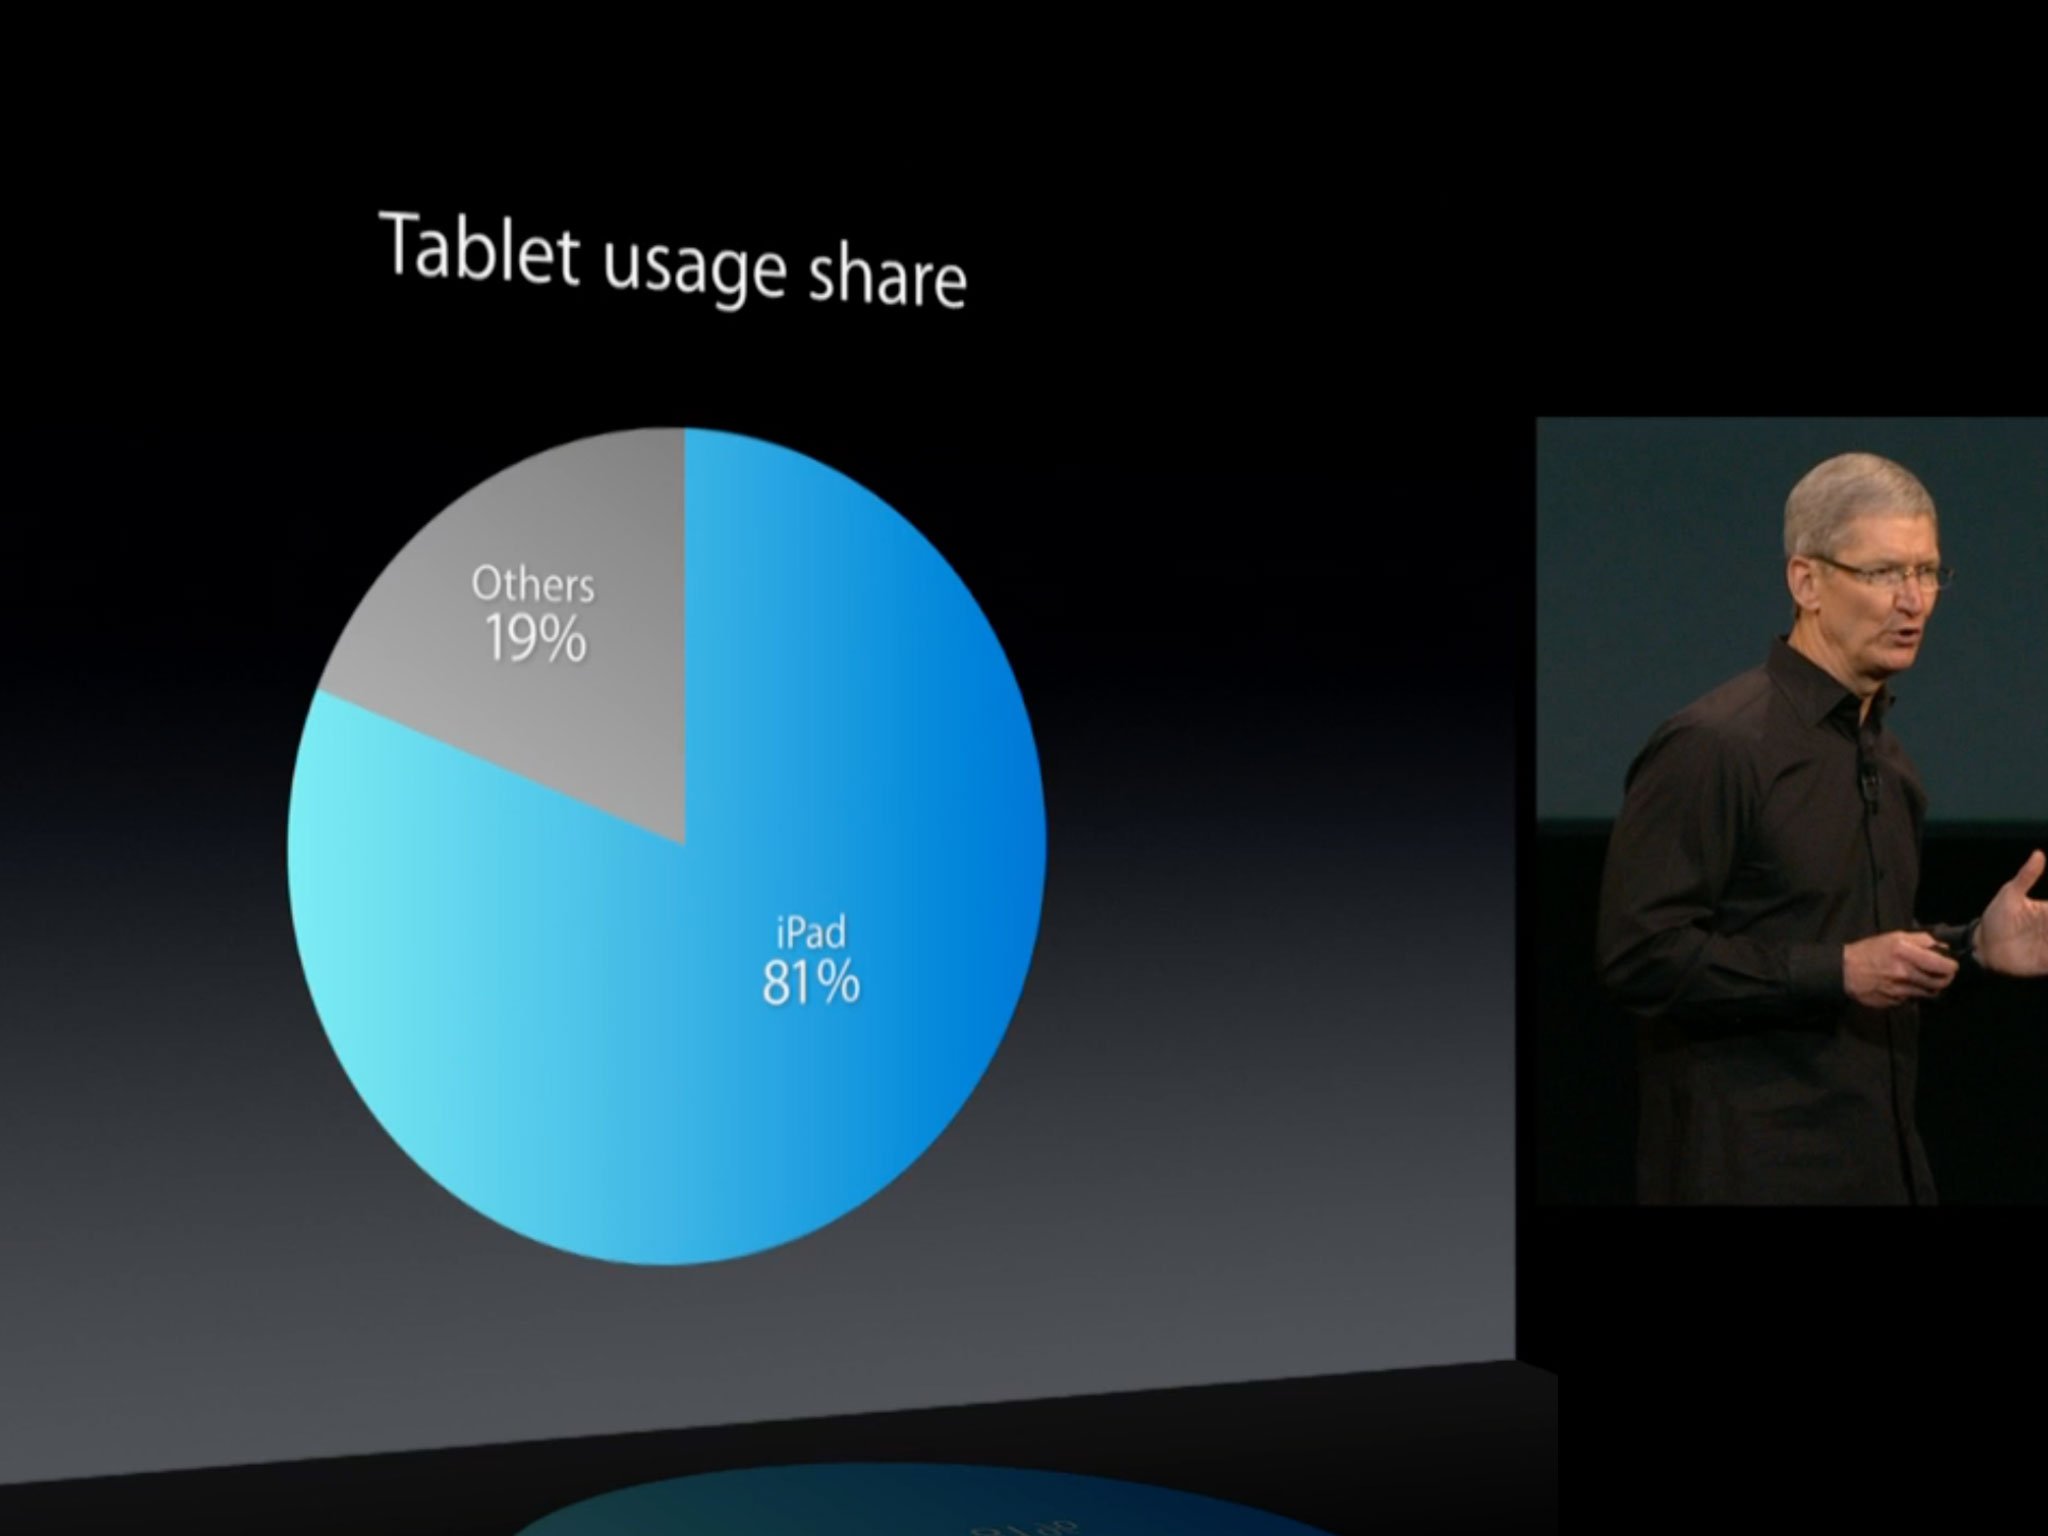 Engagement, affluence, and value: The numbers Apple's using to show Android is #2